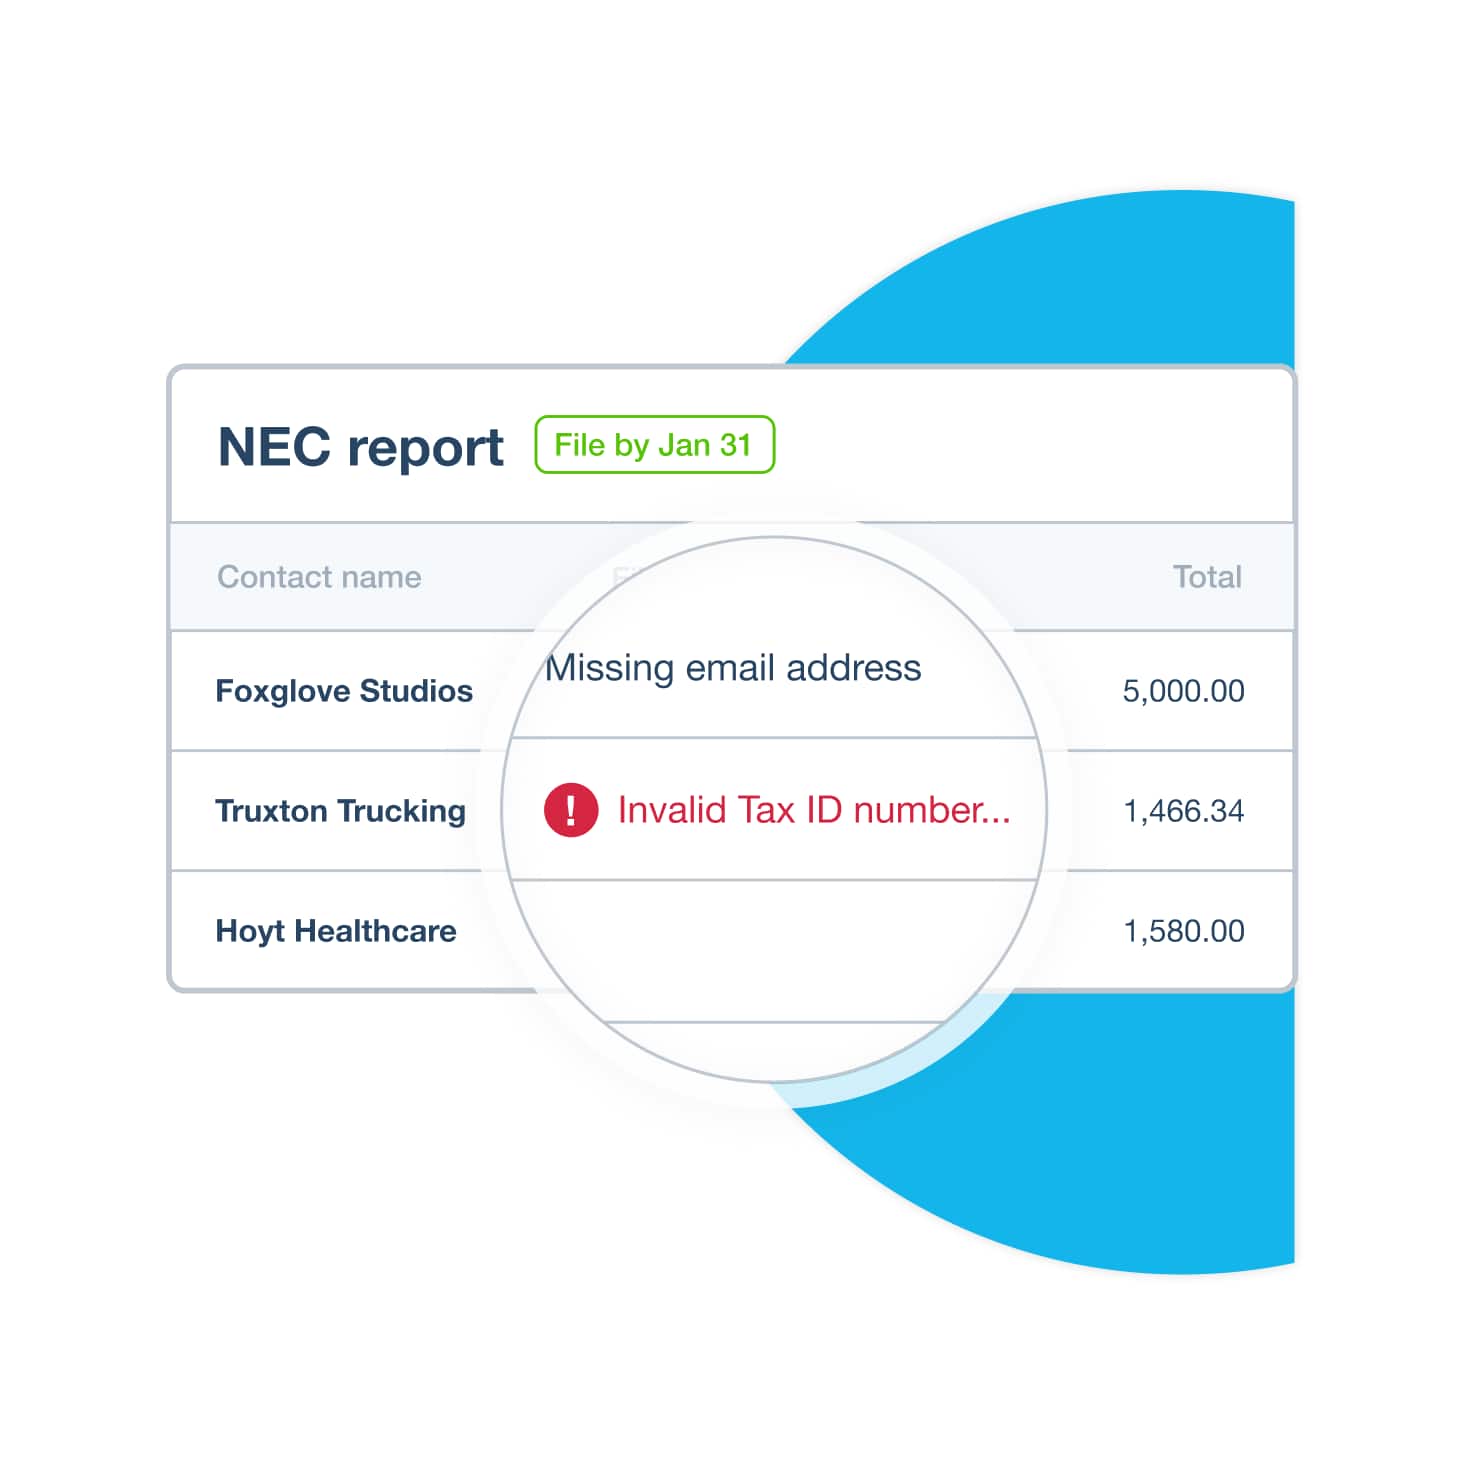 The NEC report screen displays a message alerting the business to missing contact details before they file their 1099 report.